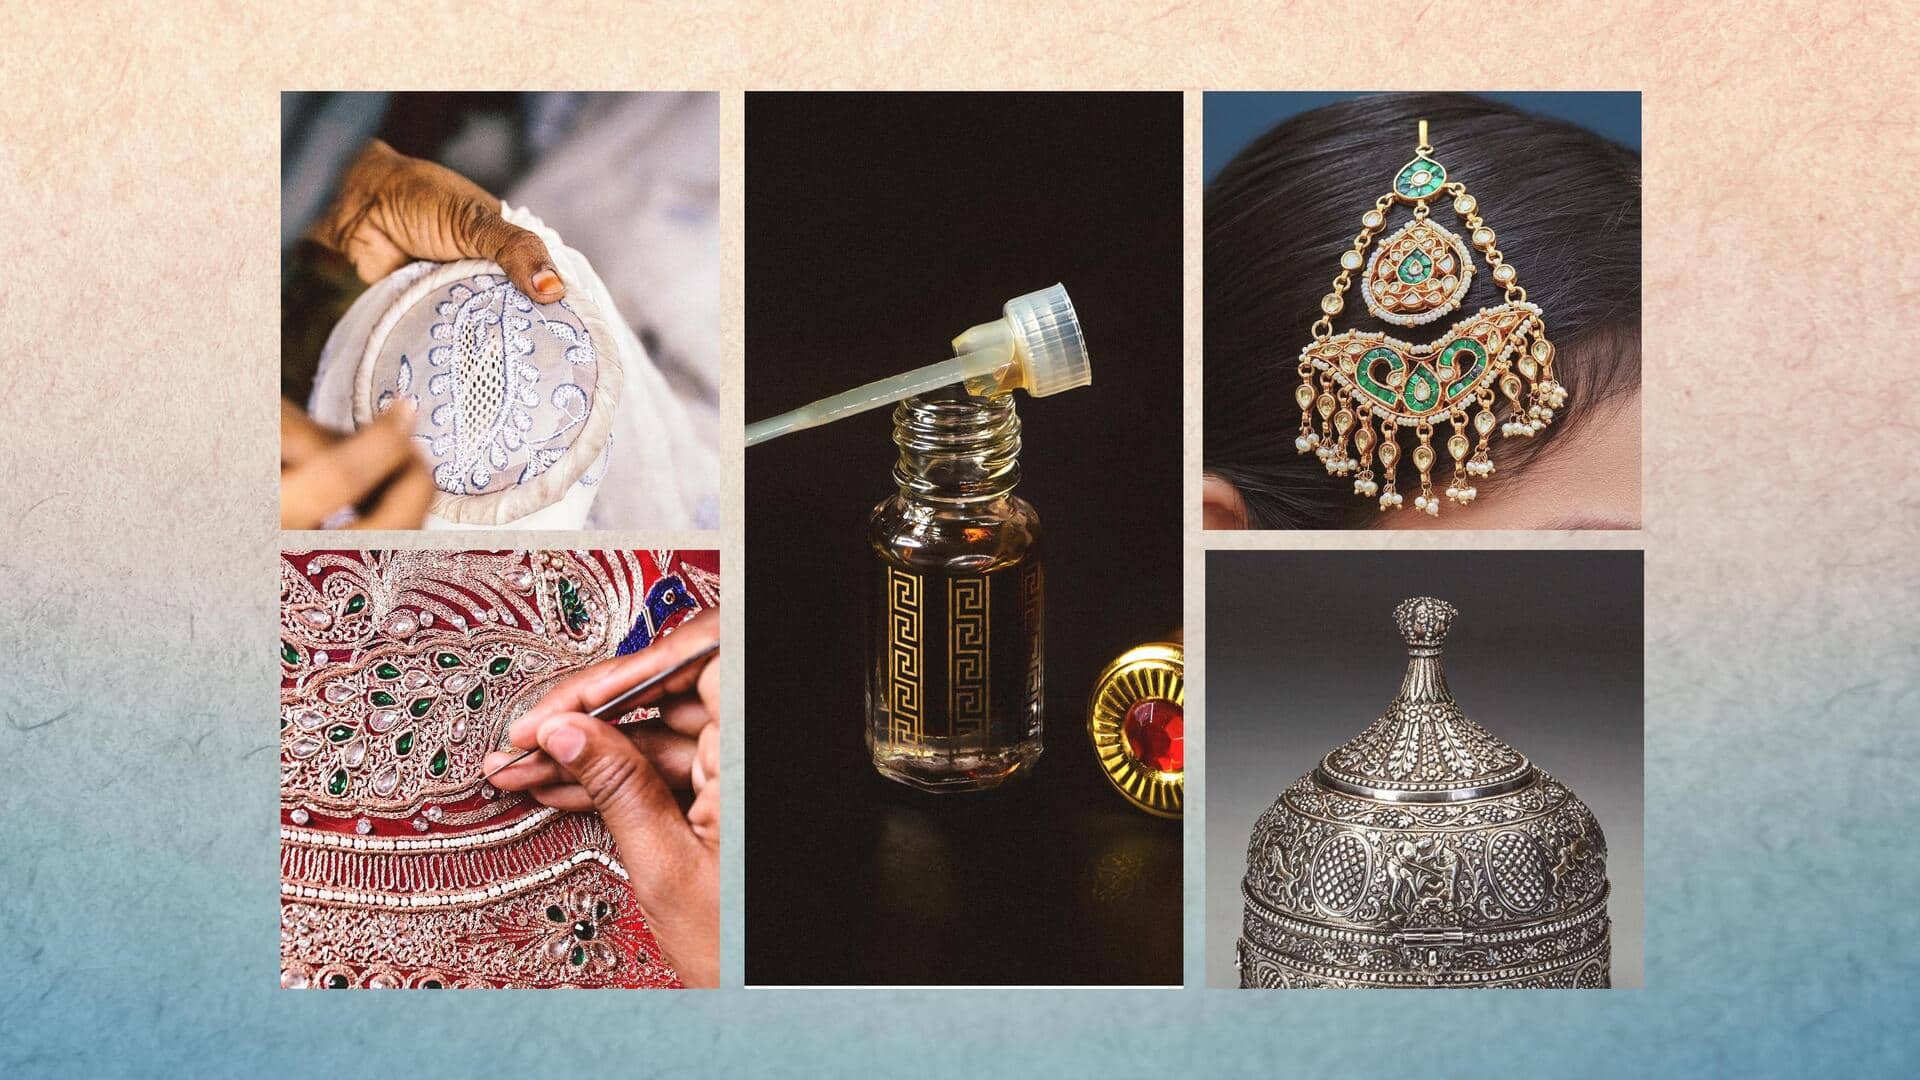 Traveling to Lucknow? Bring home these souvenirs